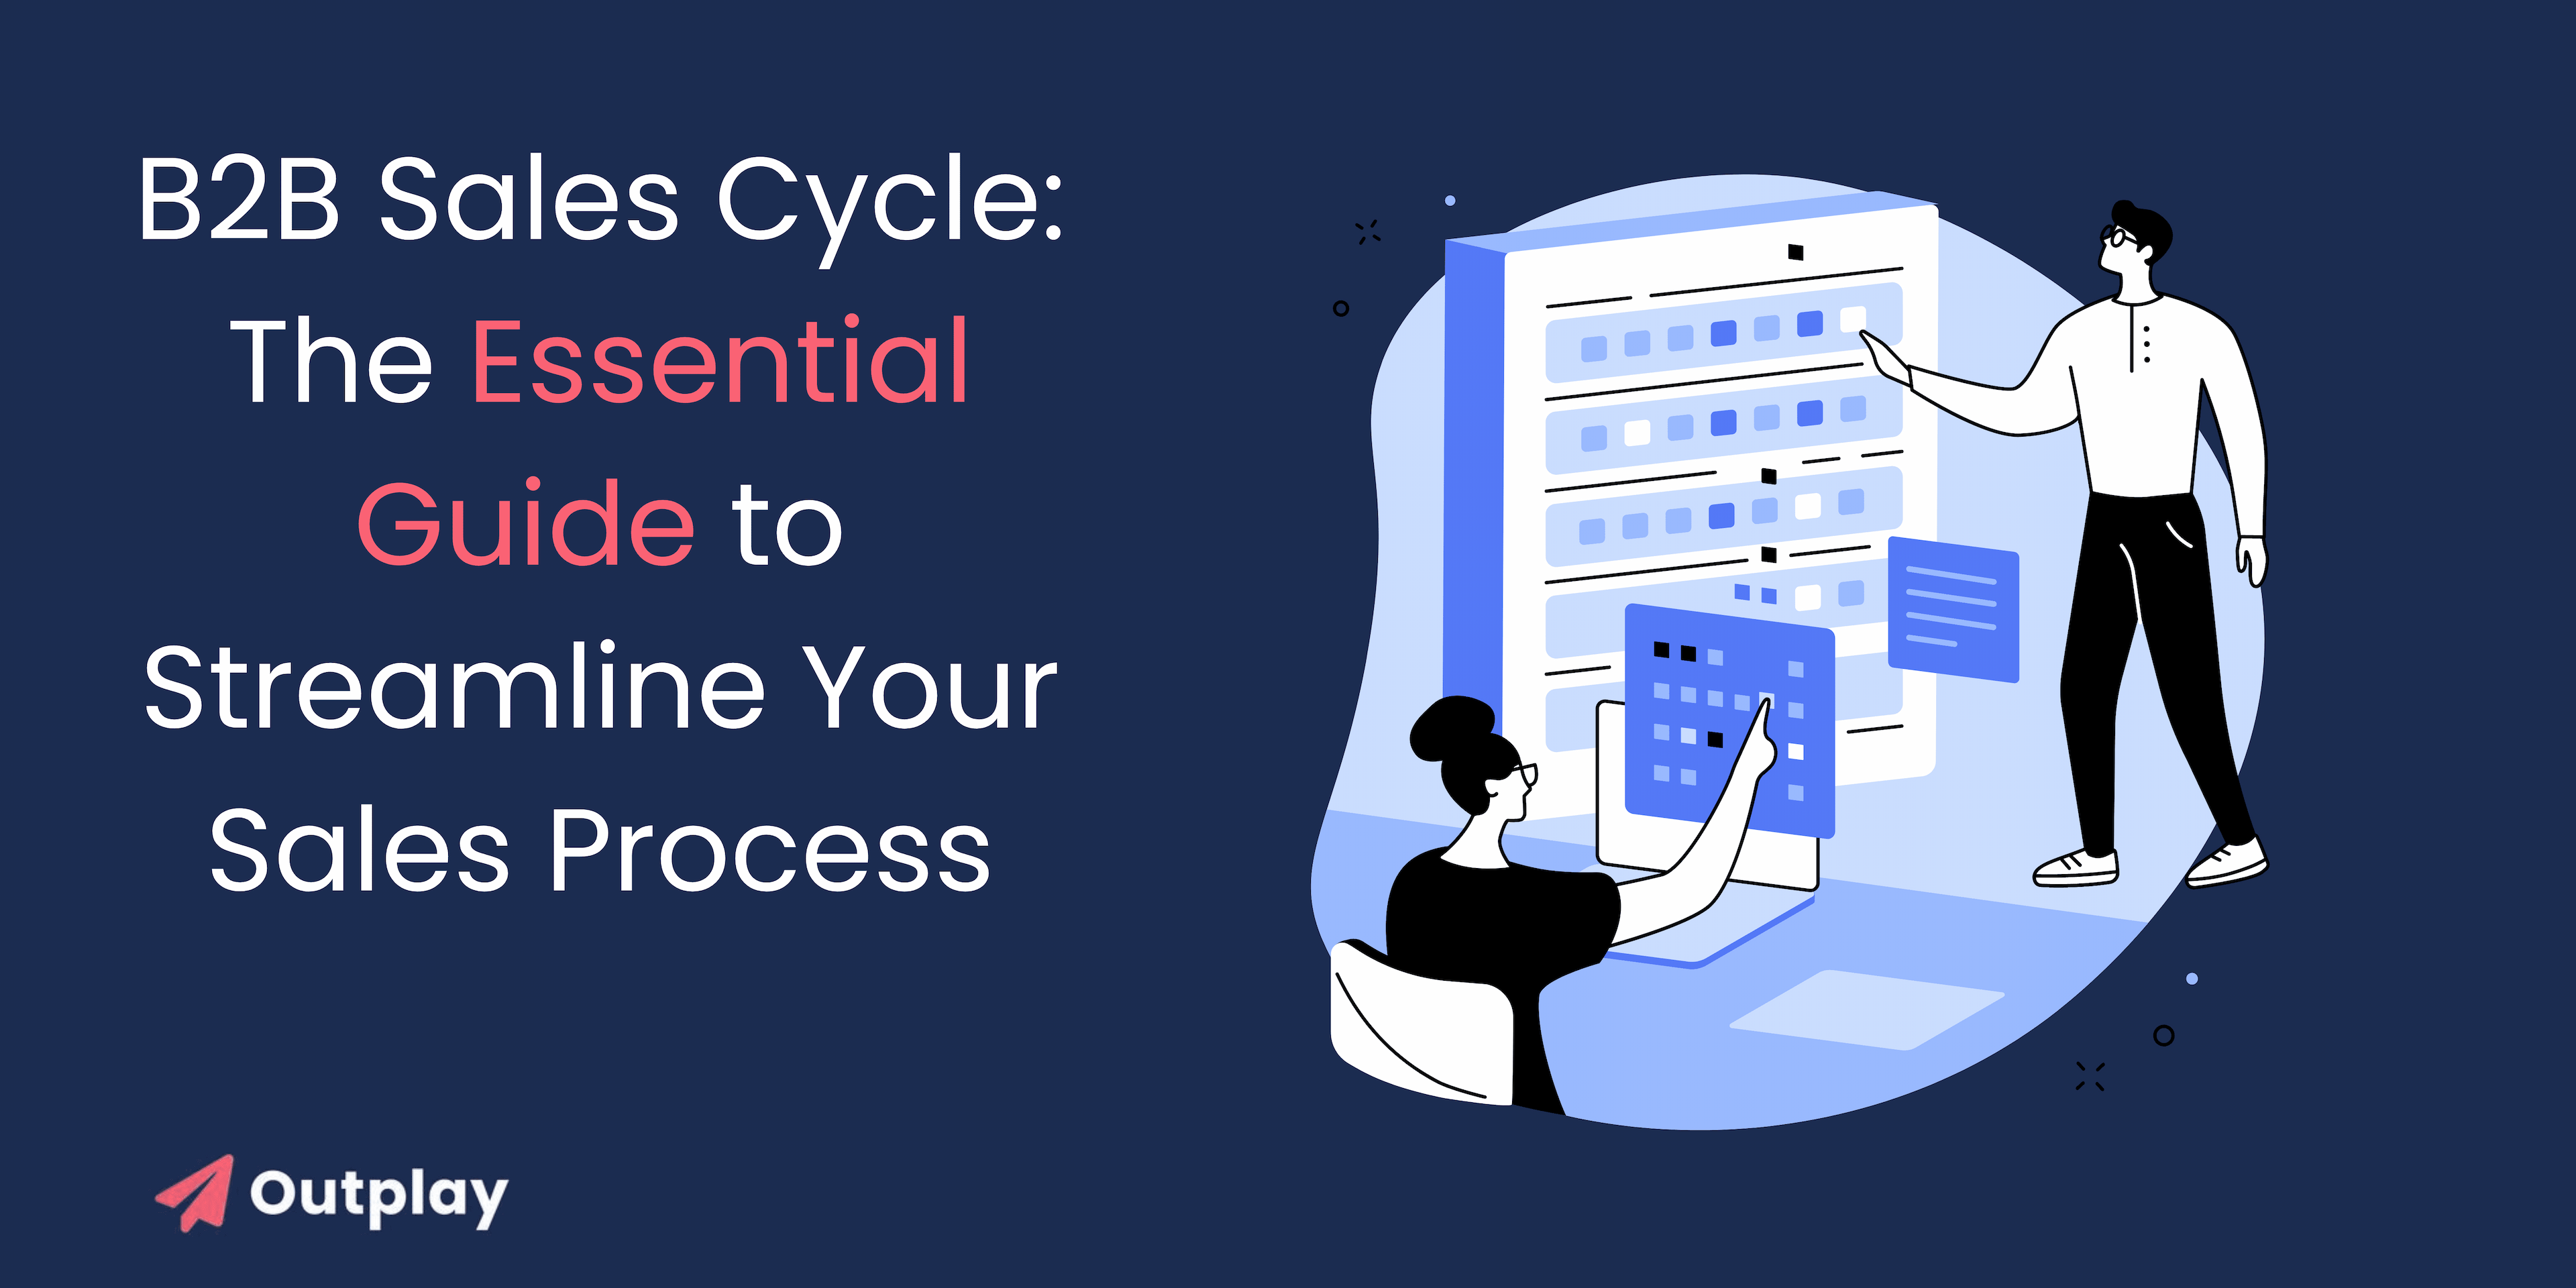 The Essential Guide to Streamline Your Sales Process